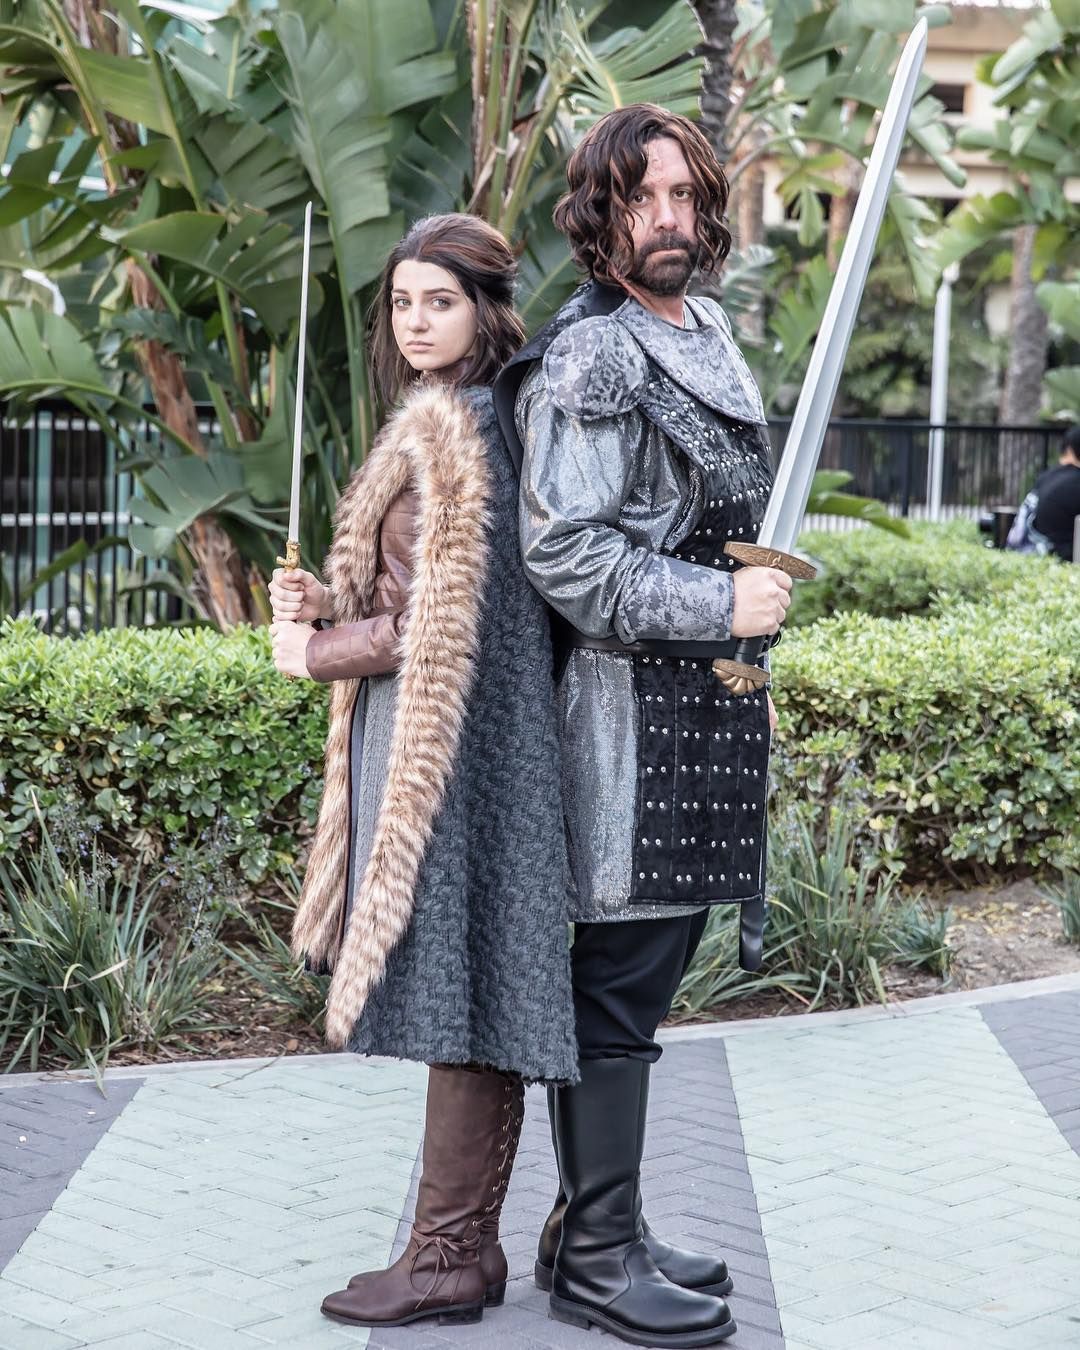 13 Best Game of Thrones Costumes - GOT Halloween Costume Ideas You Can DIY